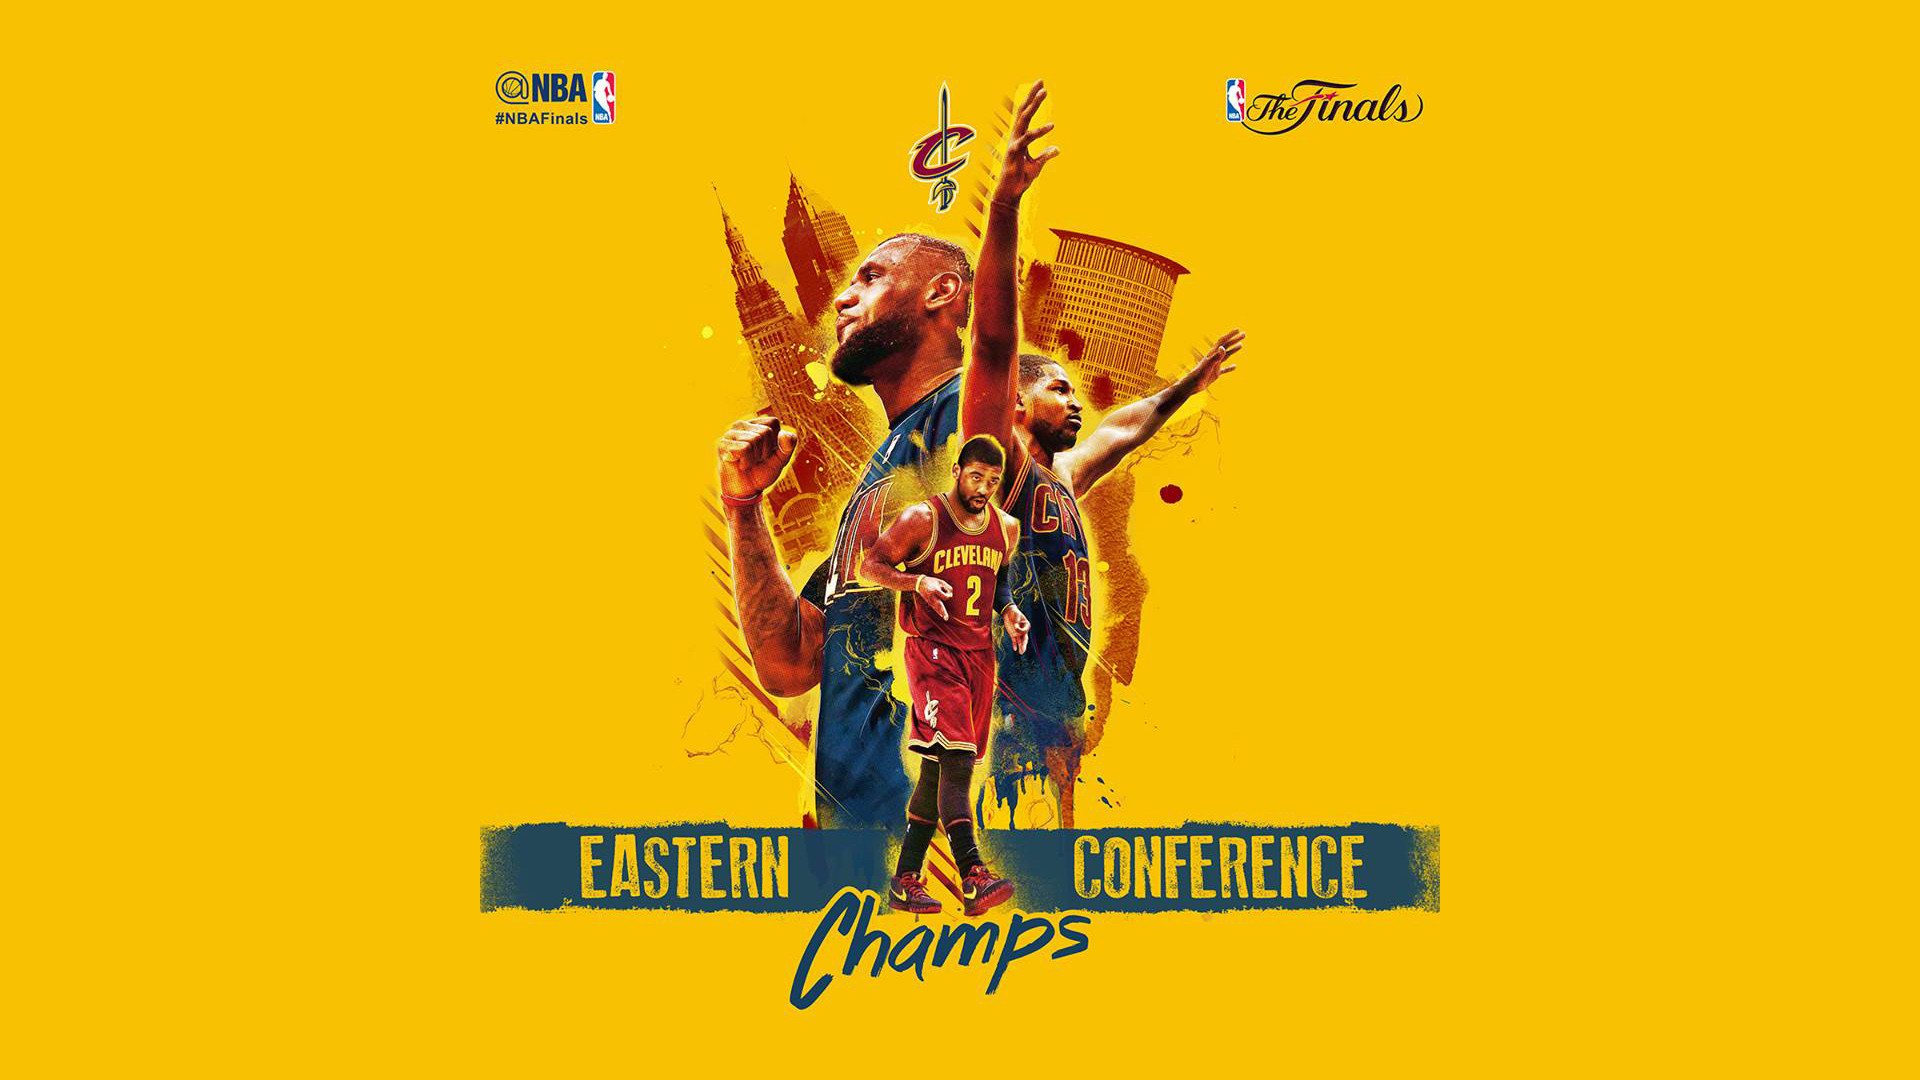 1920x1080 Cleveland Cavaliers 2015 Eastern Conference Champions Wallpaper.